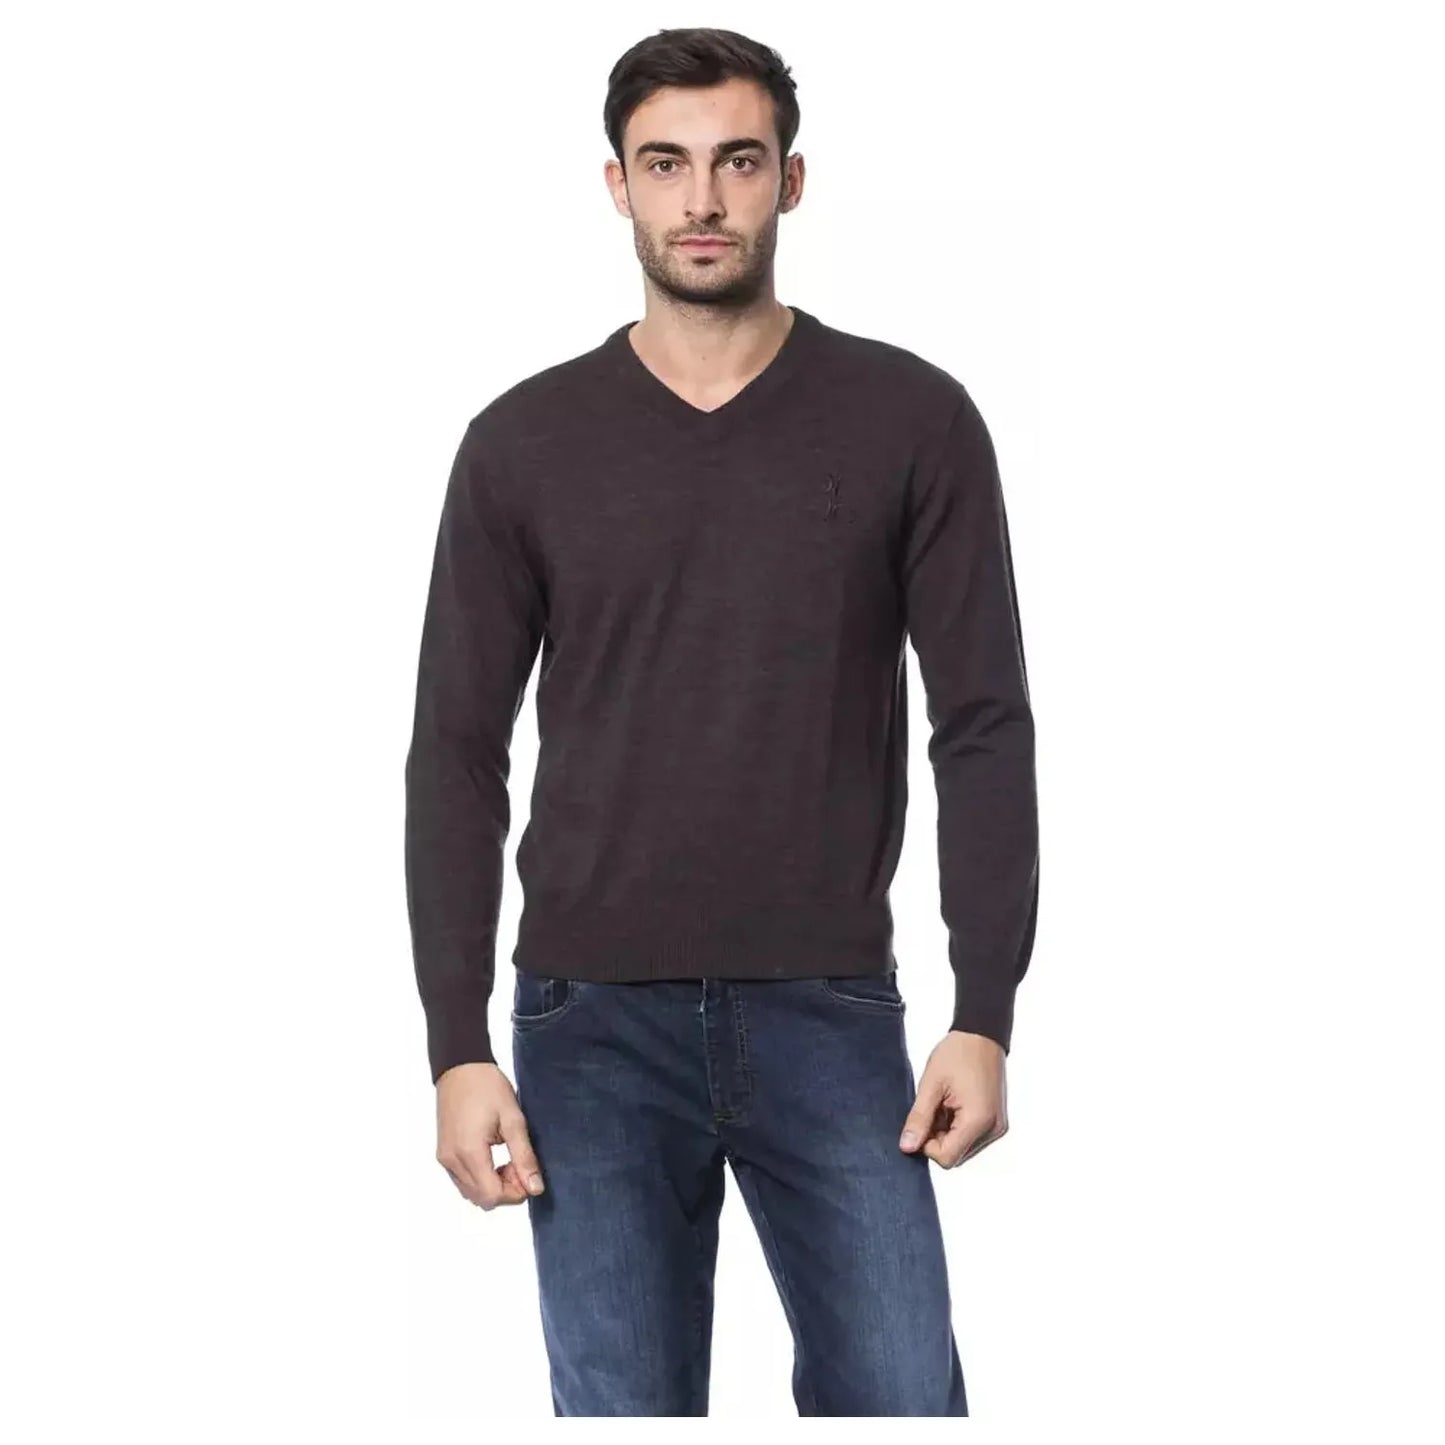 Billionaire Italian Couture Elegant Embroidered Merino Wool Sweater marr-brown-sweater stock_product_image_10491_573082752-23-6a37142a-caa.webp